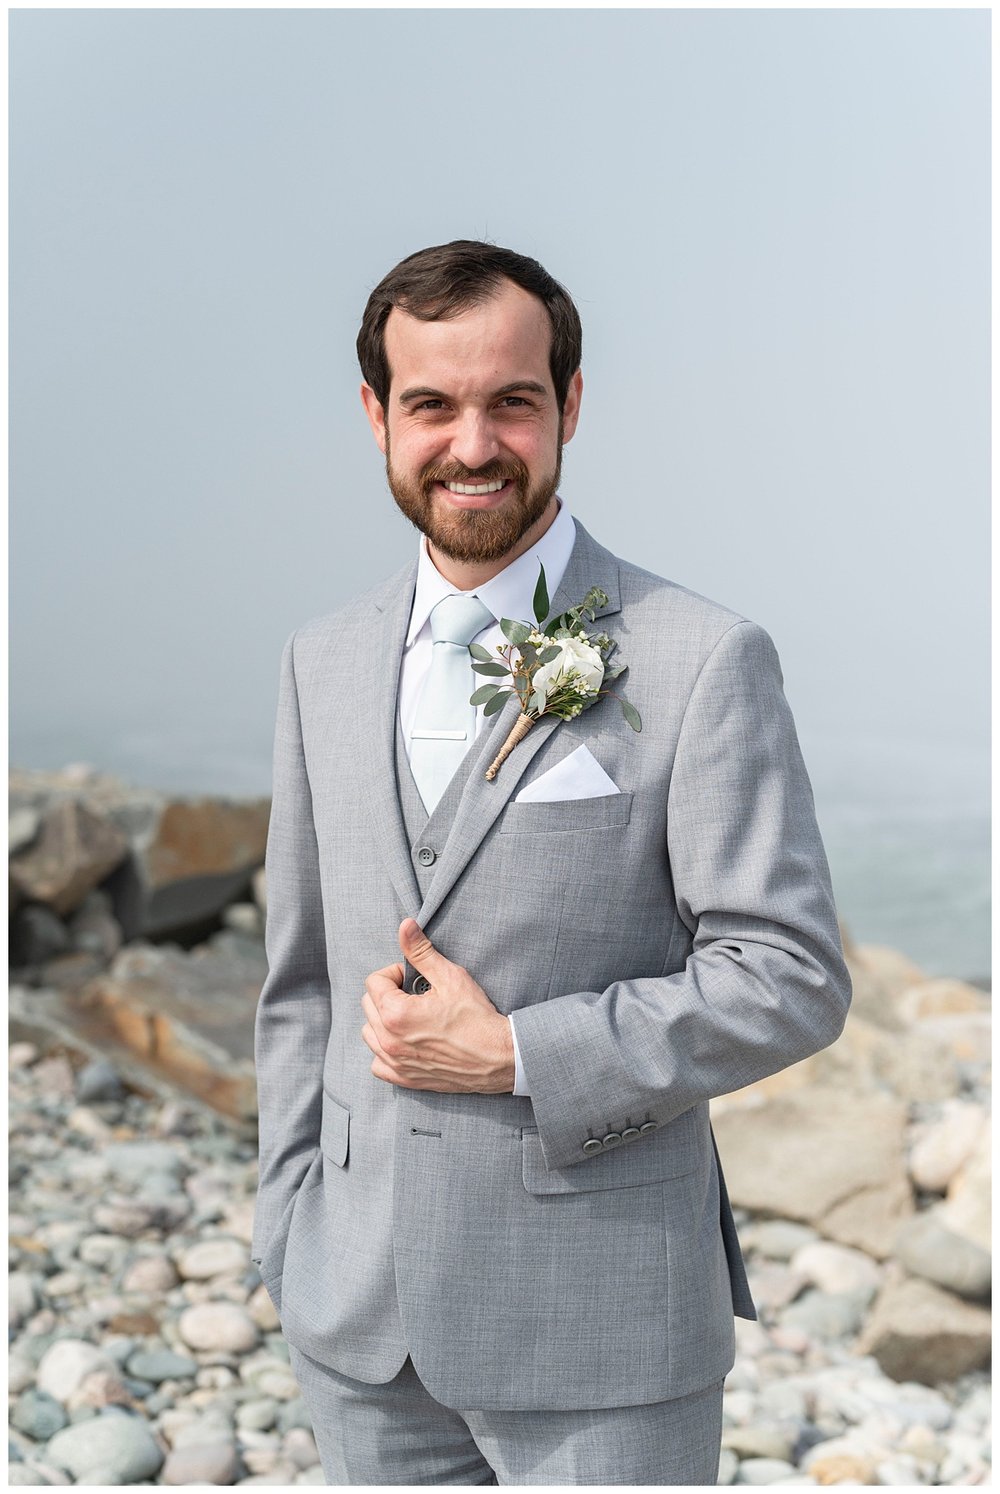 groom in gray suit smiling at camera for New England wedding photographer